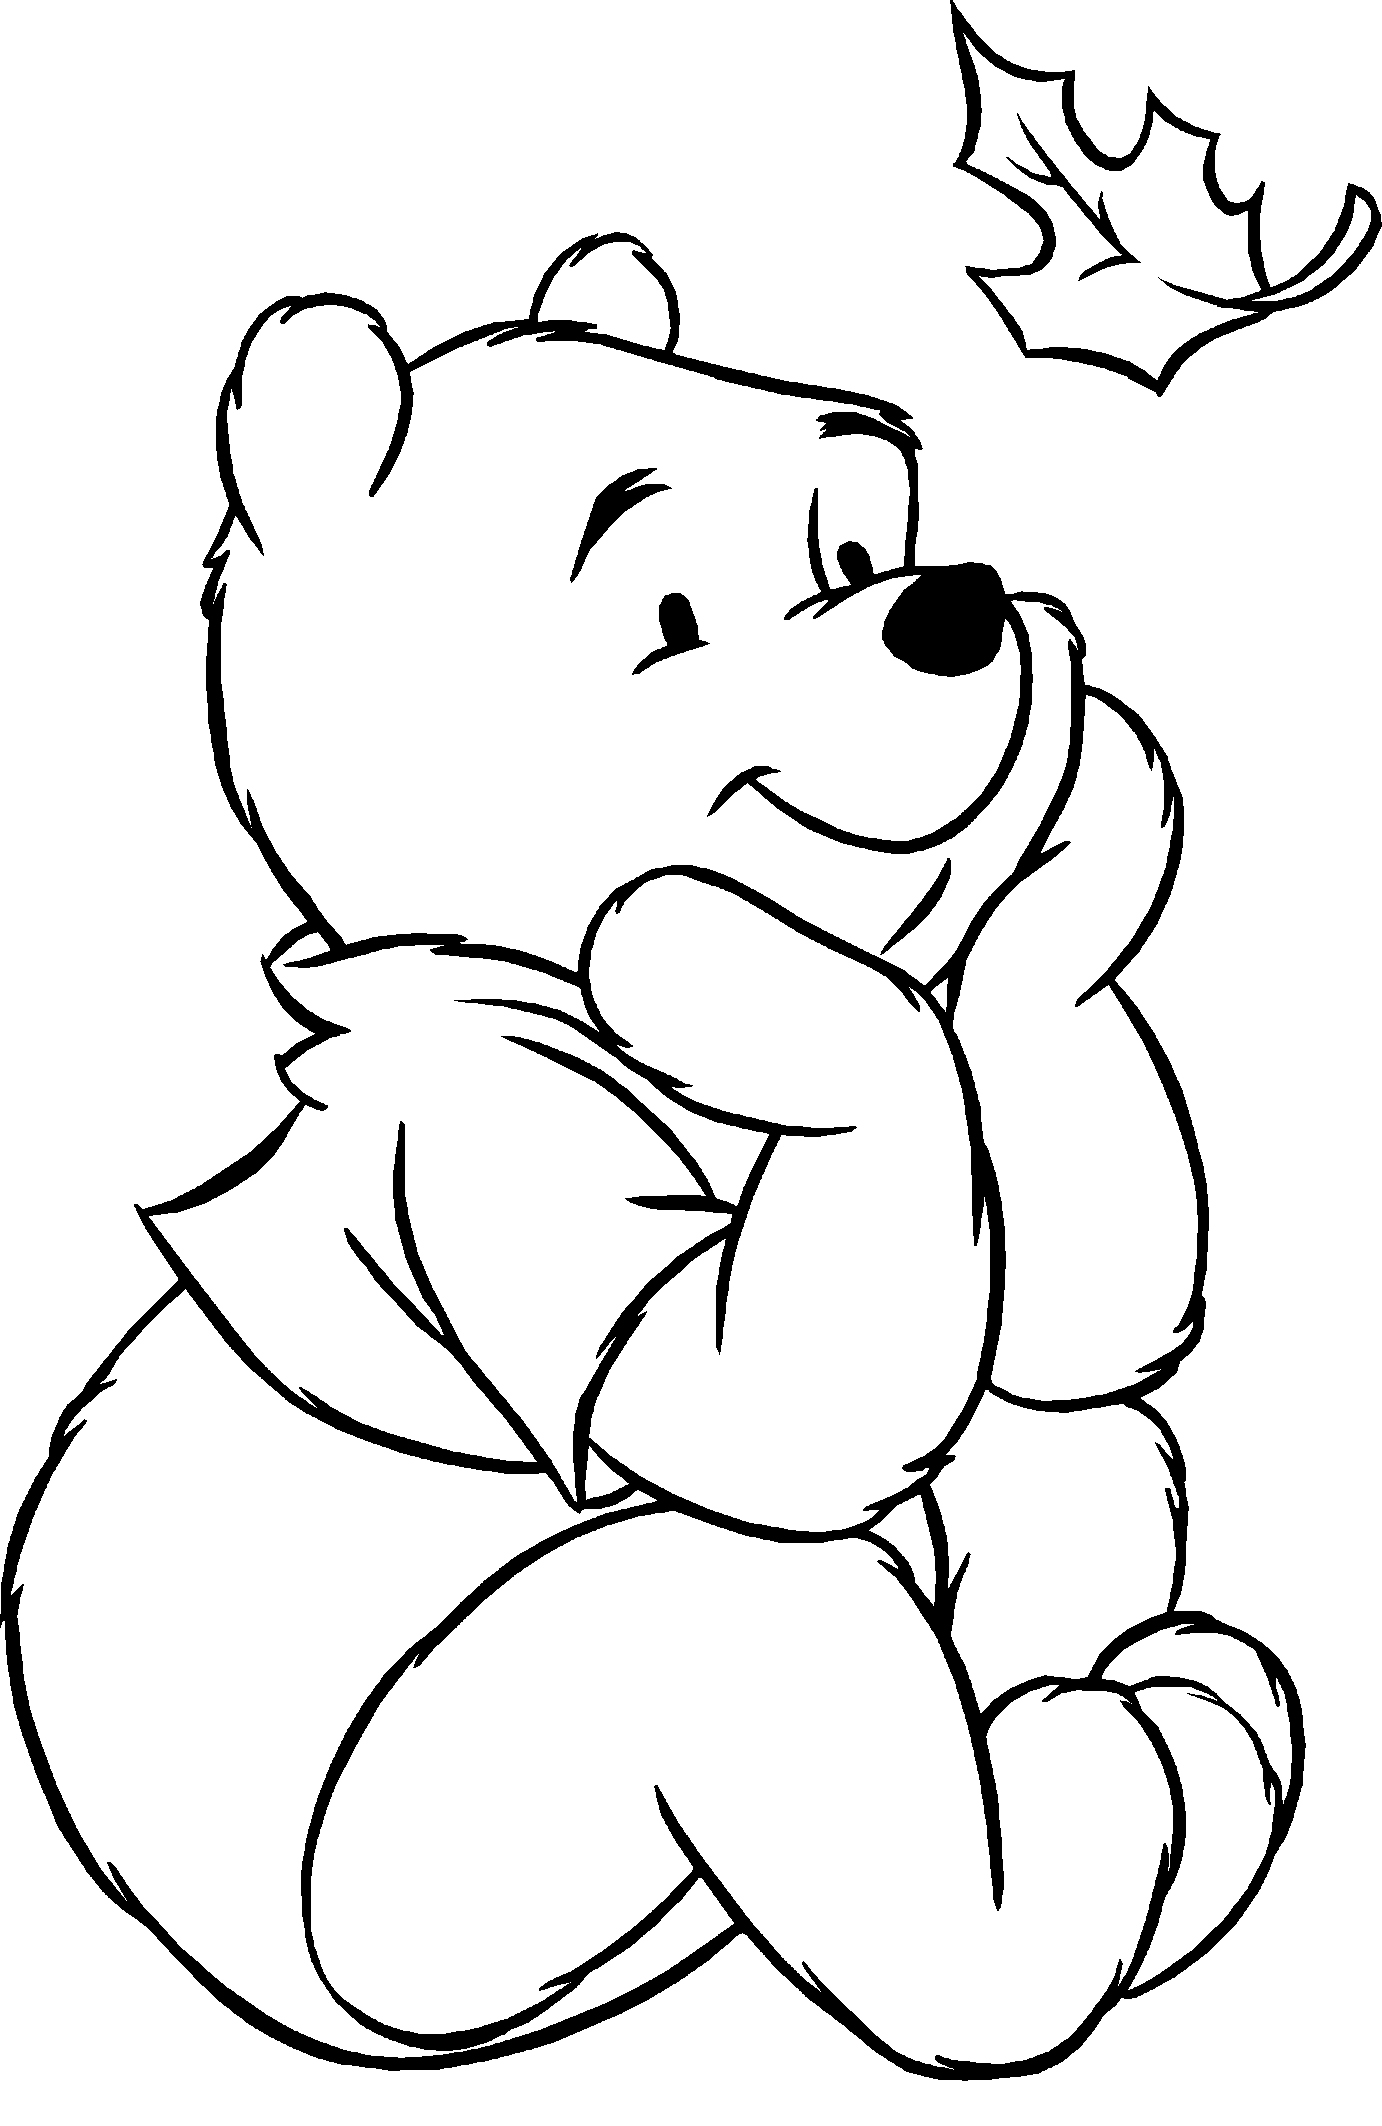 Winnie The Pooh Coloring Pages 4 Coloring Kids